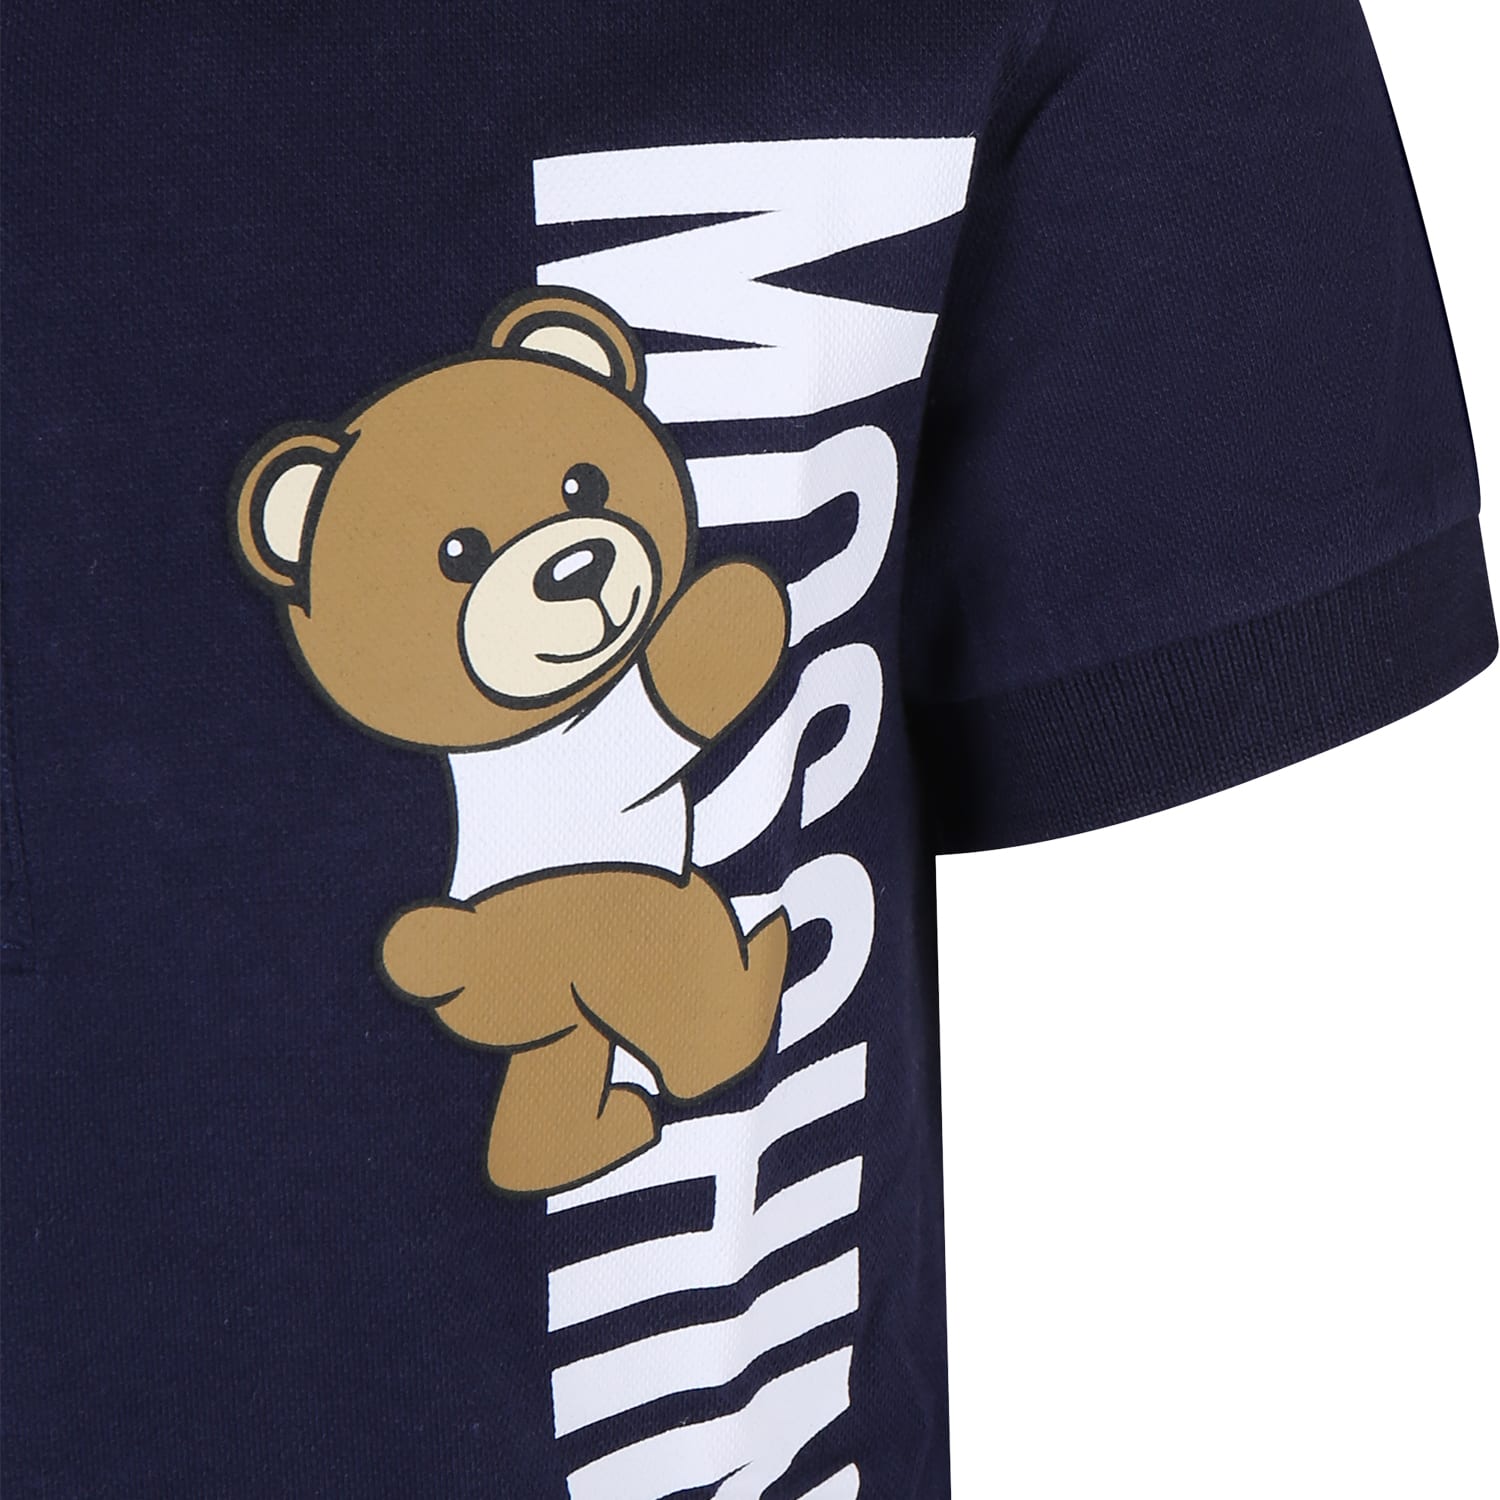 Shop Moschino Blue Polo Shirt For Boy With Teddy Bear And Logo